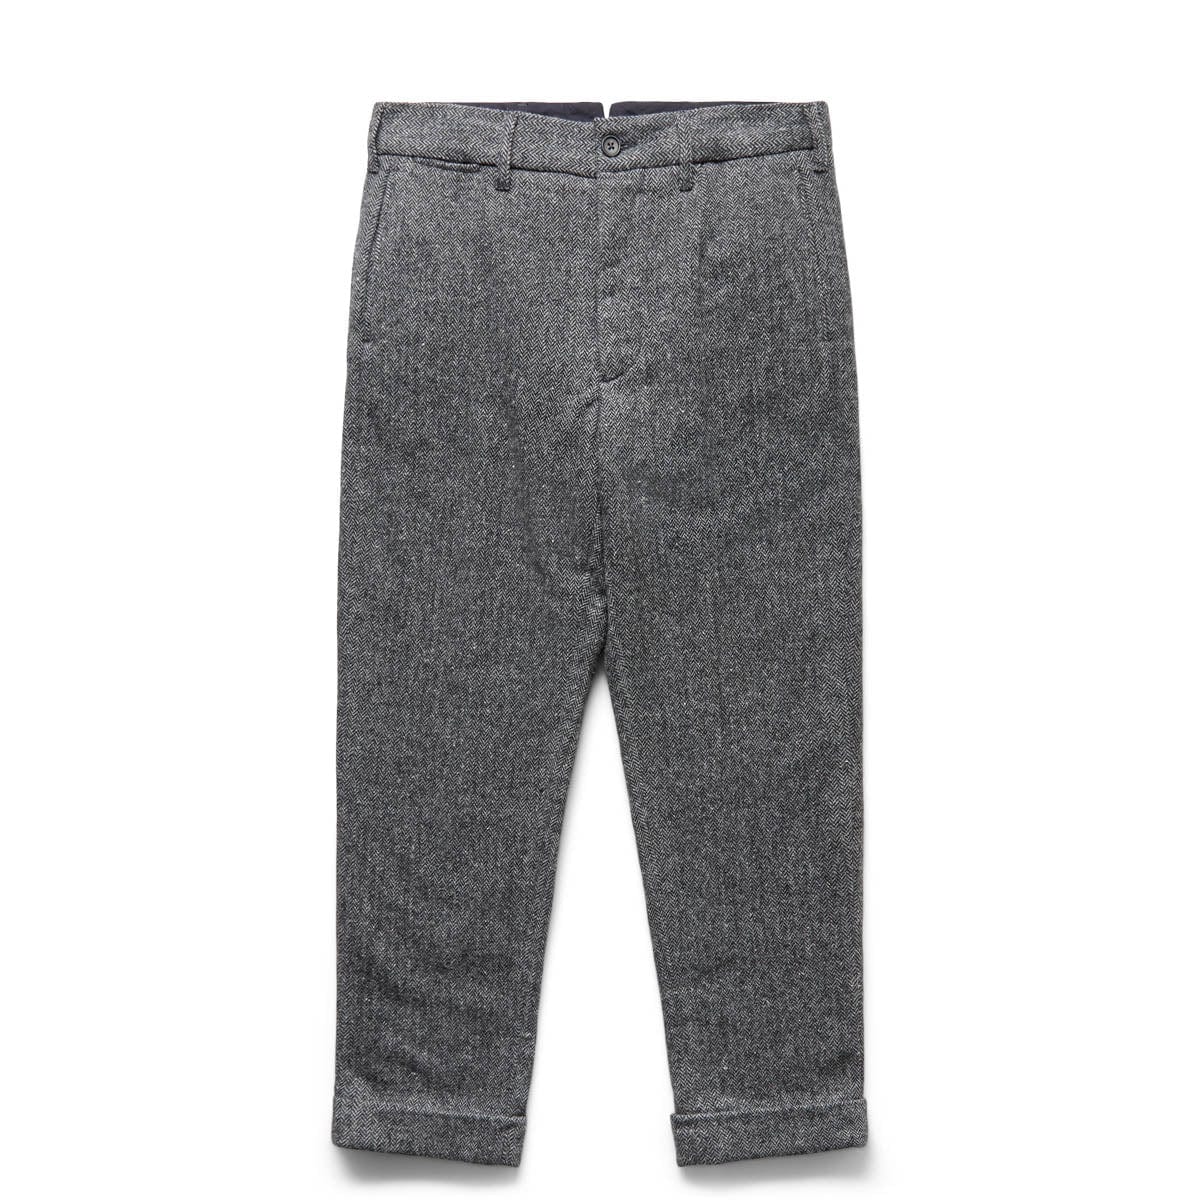 Engineered Garments Bottoms ANDOVER PANT